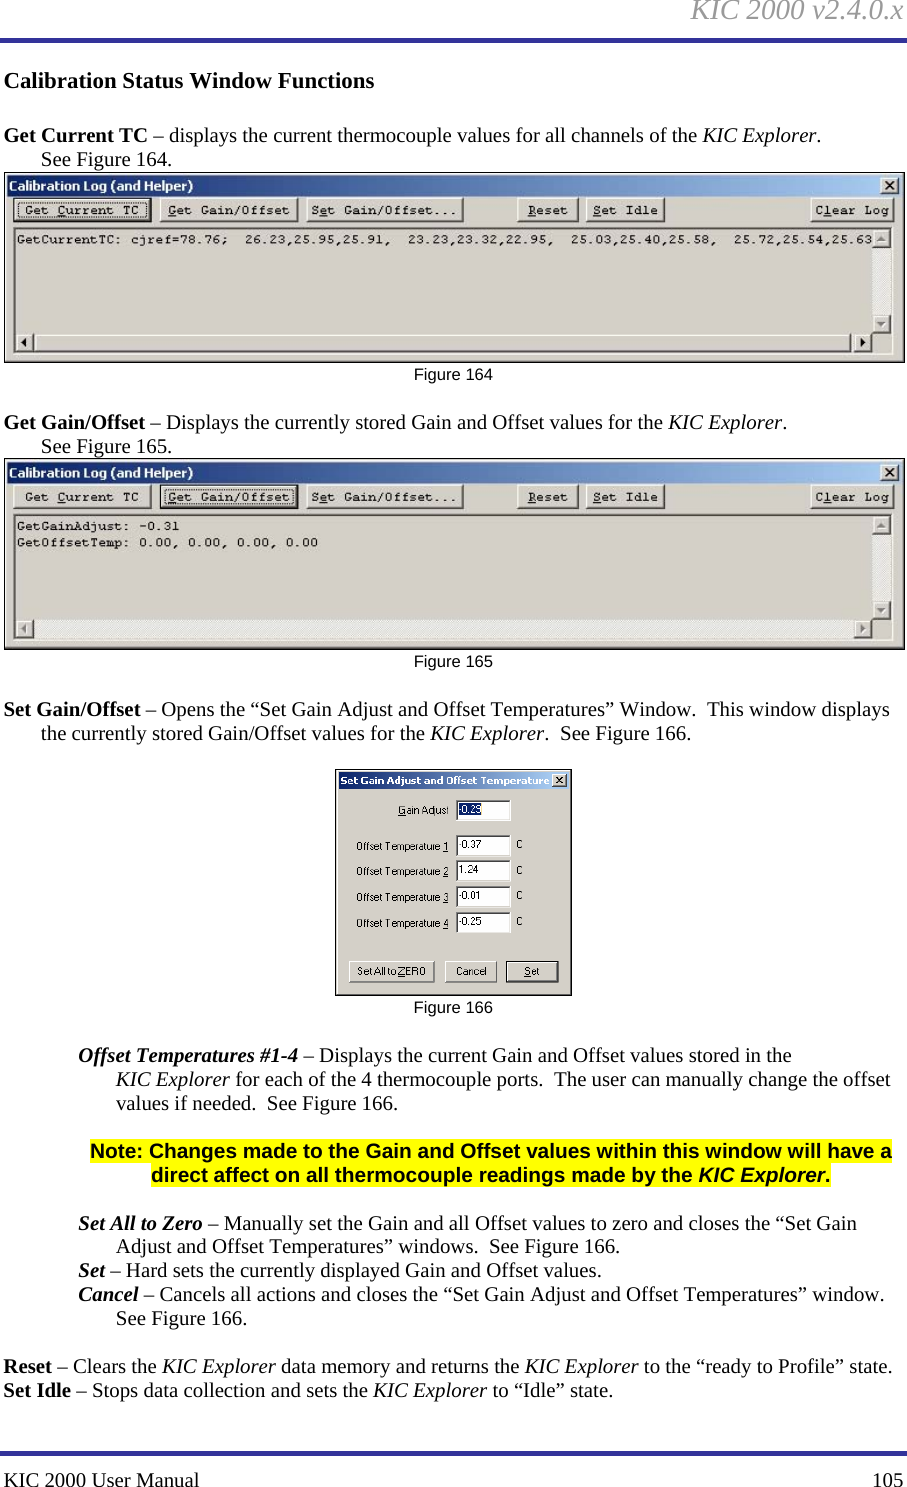 KIC 2000 v2.4.0.x KIC 2000 User Manual    105 Calibration Status Window Functions  Get Current TC – displays the current thermocouple values for all channels of the KIC Explorer.  See Figure 164.   Figure 164  Get Gain/Offset – Displays the currently stored Gain and Offset values for the KIC Explorer. See Figure 165.   Figure 165  Set Gain/Offset – Opens the “Set Gain Adjust and Offset Temperatures” Window.  This window displays the currently stored Gain/Offset values for the KIC Explorer.  See Figure 166.    Figure 166  Offset Temperatures #1-4 – Displays the current Gain and Offset values stored in the KIC Explorer for each of the 4 thermocouple ports.  The user can manually change the offset values if needed.  See Figure 166.    Note: Changes made to the Gain and Offset values within this window will have a direct affect on all thermocouple readings made by the KIC Explorer.    Set All to Zero – Manually set the Gain and all Offset values to zero and closes the “Set Gain Adjust and Offset Temperatures” windows.  See Figure 166.   Set – Hard sets the currently displayed Gain and Offset values.   Cancel – Cancels all actions and closes the “Set Gain Adjust and Offset Temperatures” window.  See Figure 166.    Reset – Clears the KIC Explorer data memory and returns the KIC Explorer to the “ready to Profile” state. Set Idle – Stops data collection and sets the KIC Explorer to “Idle” state.   